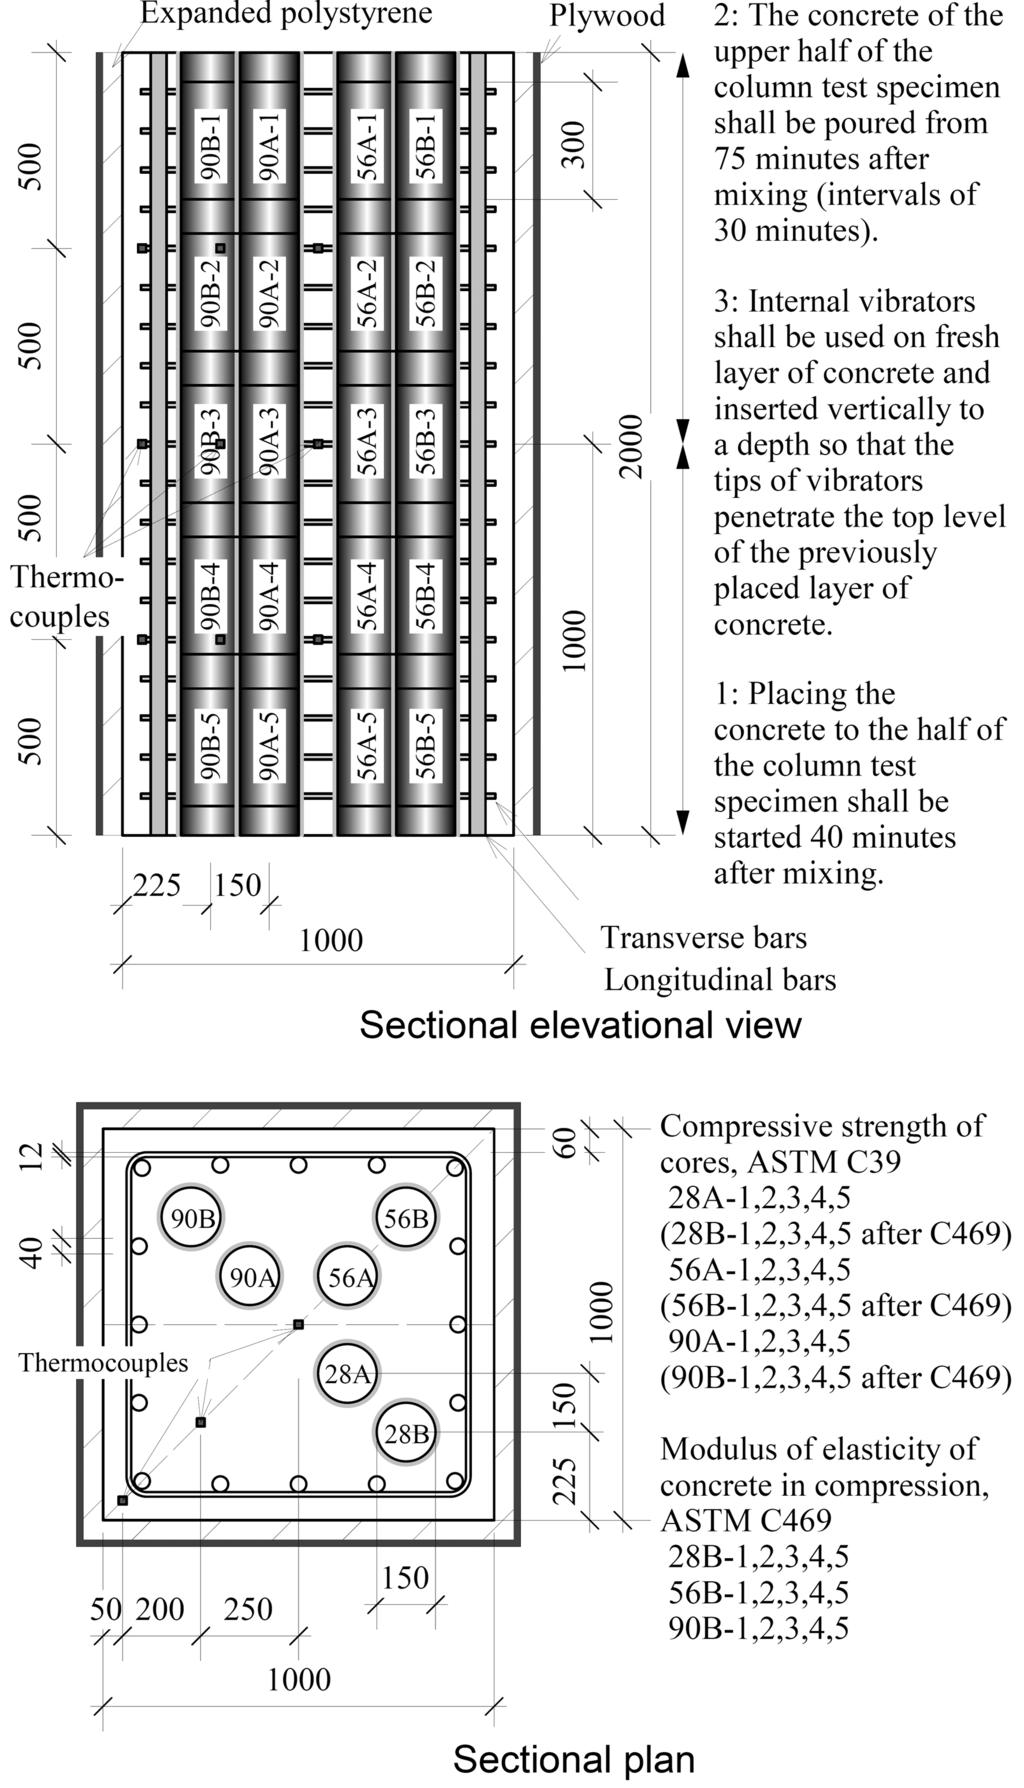 178 S. Kuroiwa, Y. Inoue, K. Fujioka and A. William / Journal of Advanced Concrete Technology Vol. 5, No. 2, 171-18, 27 Fig. 8 Outline of mock-up with cross section of 1, by 1, mm and height of 2, mm.